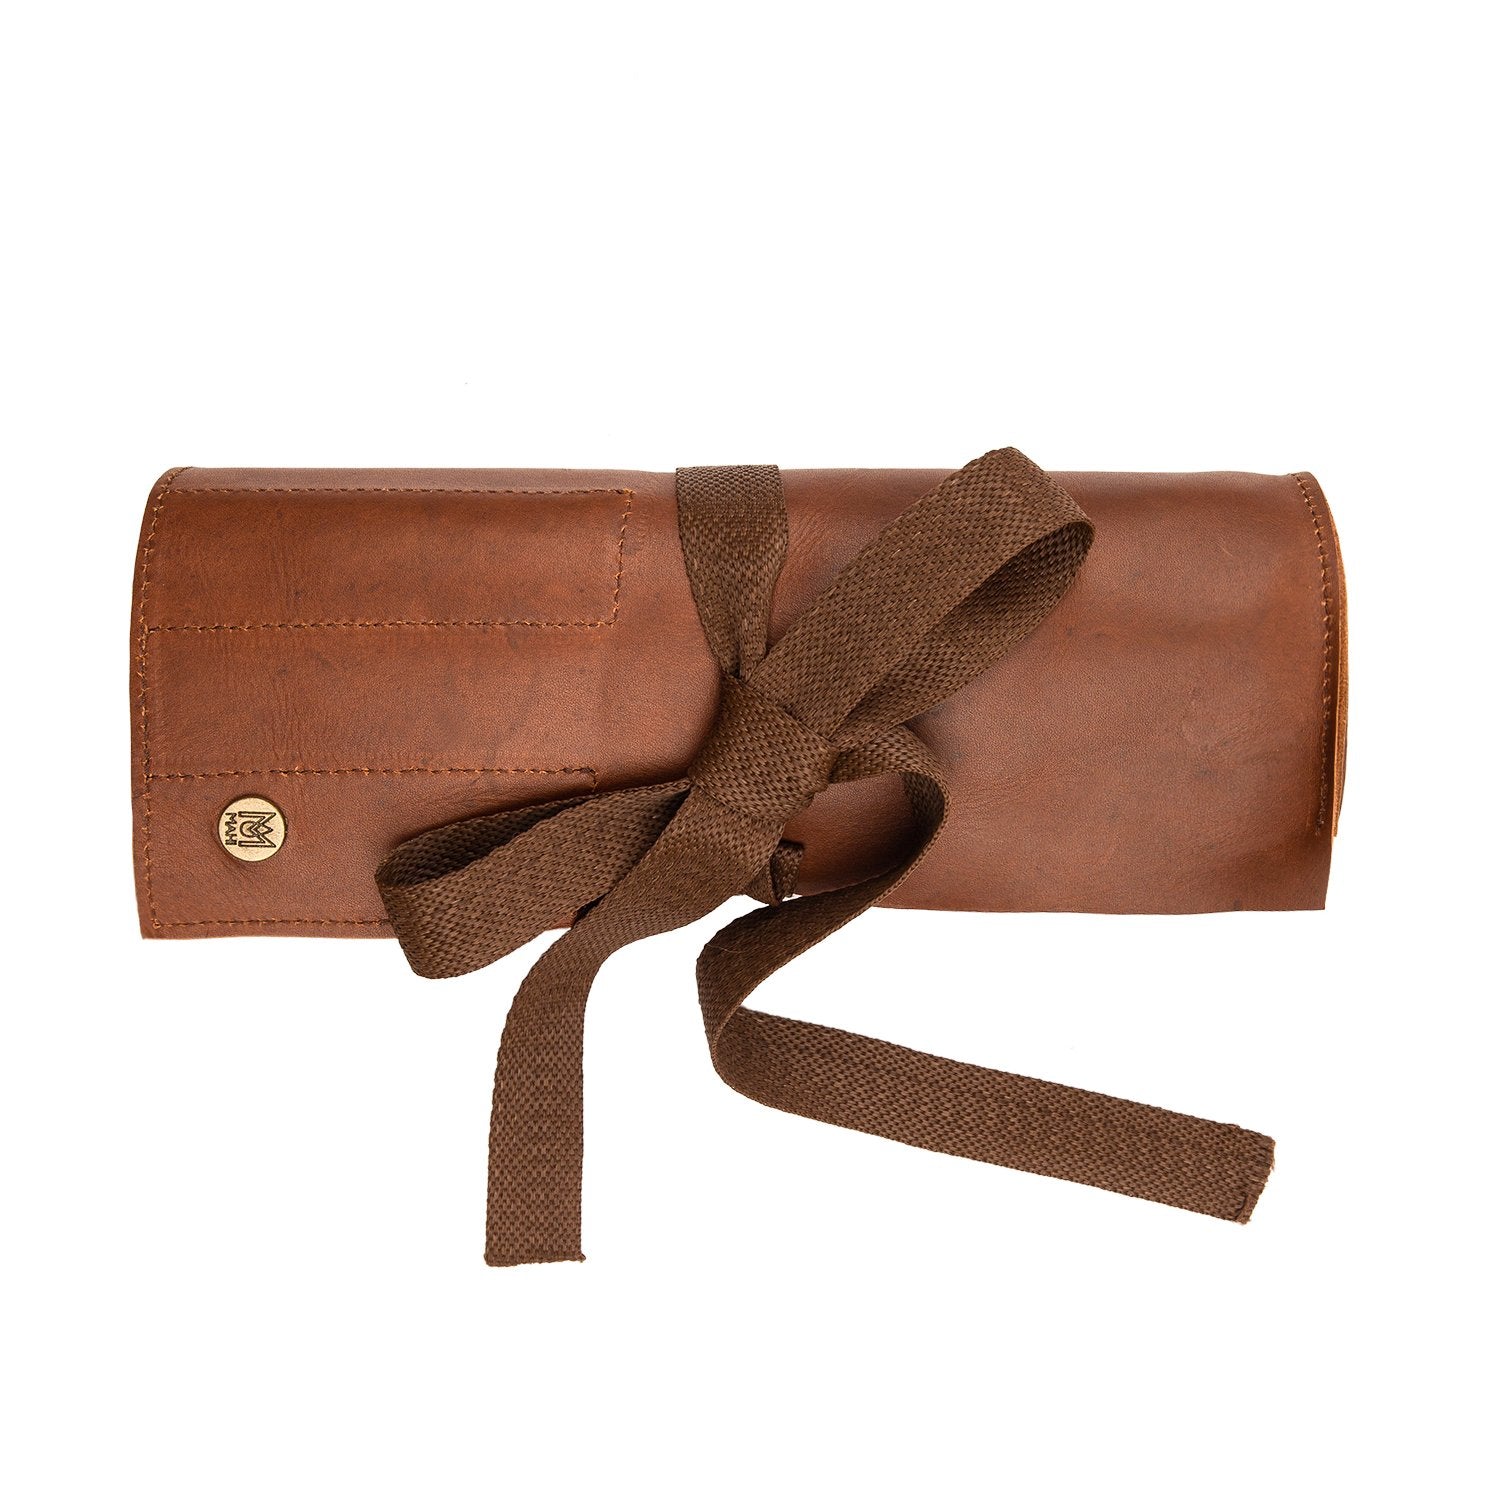 https://mahileather.com/cdn/shop/products/brown-leather-tool-wrap-for-crafters-hobbyists-mechanics.jpg?v=1601298912